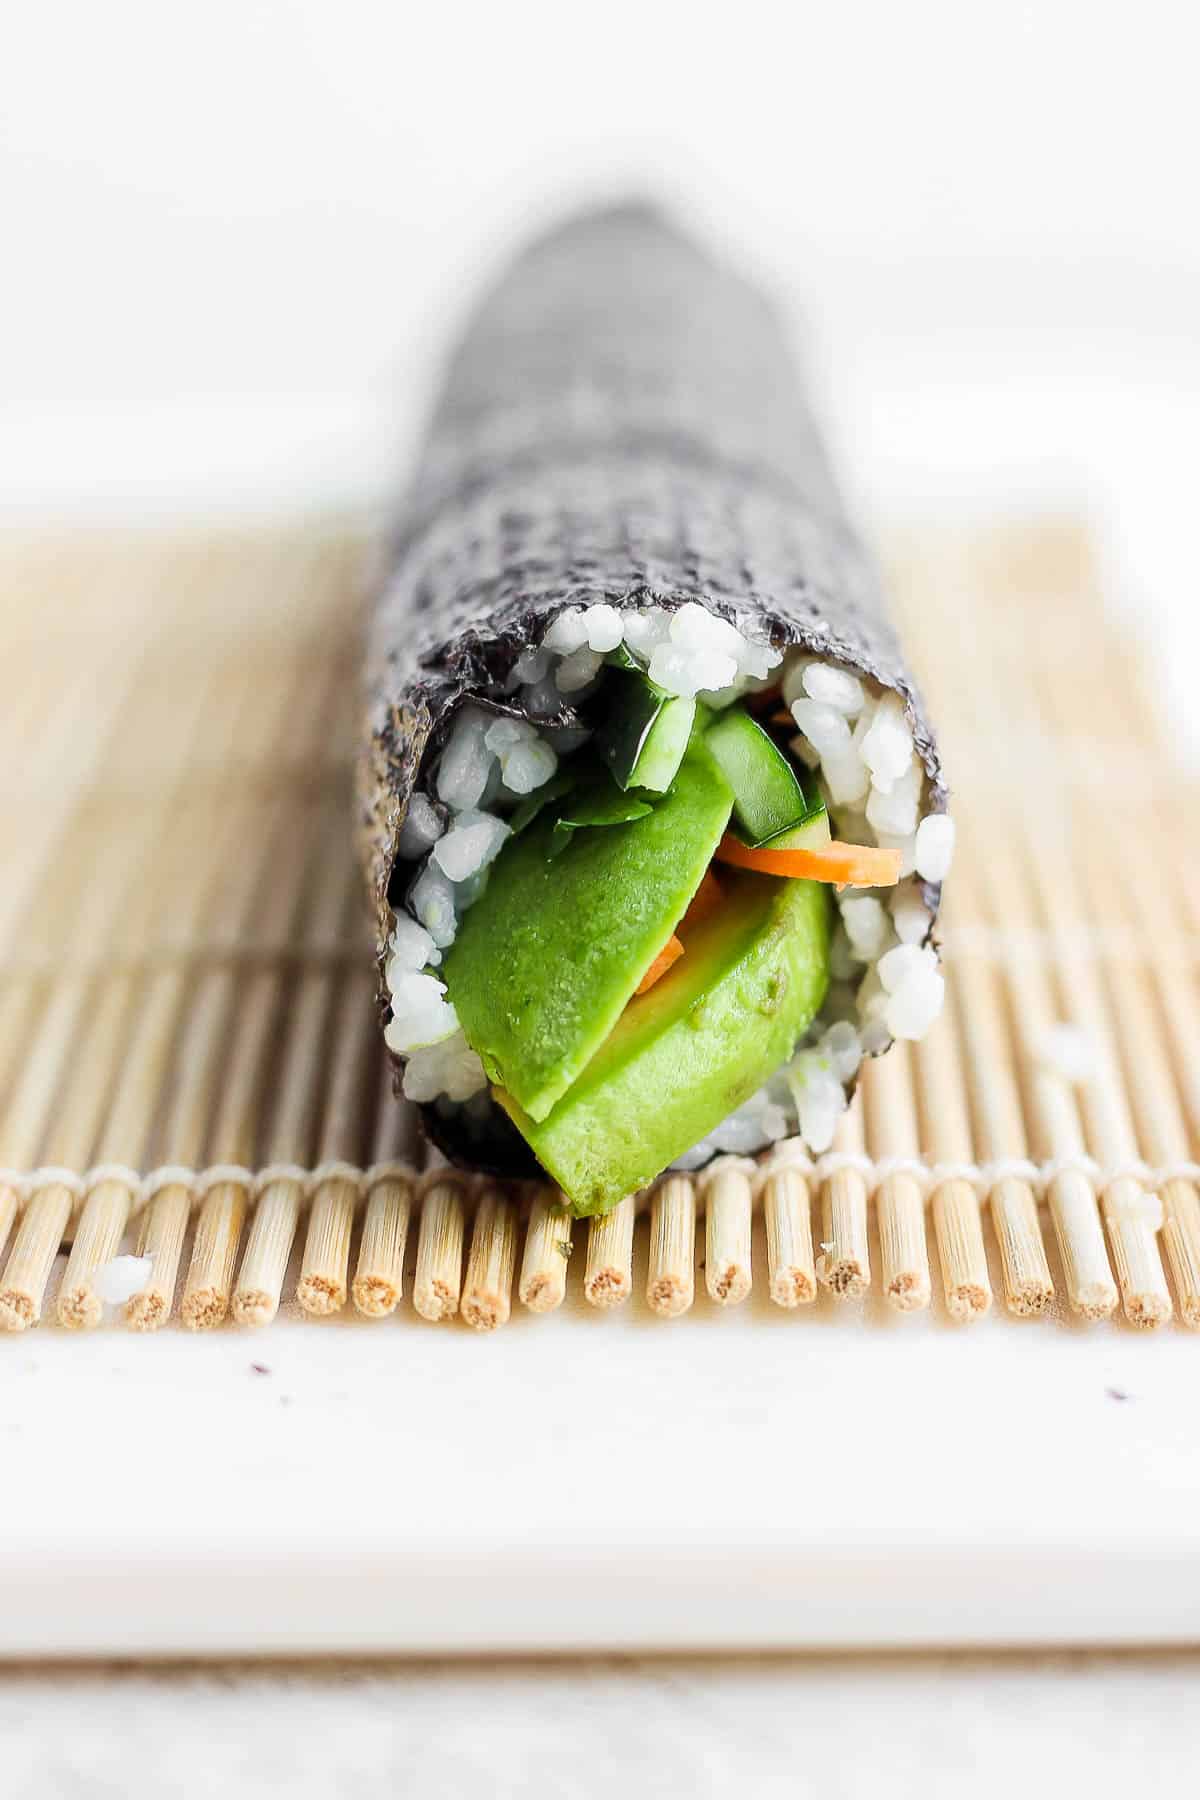 A fully rolled avocado roll.